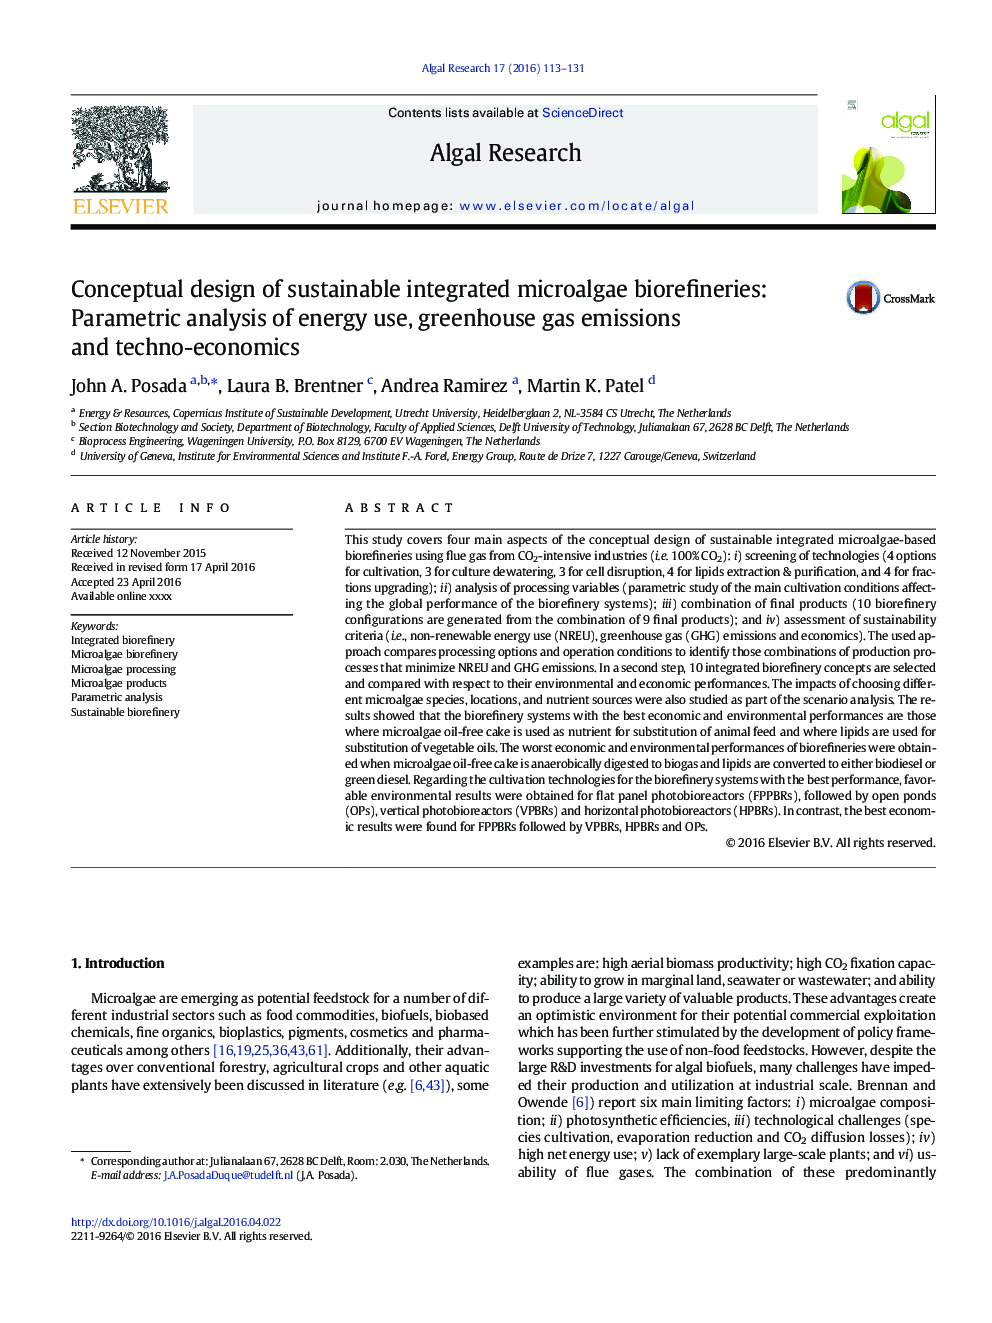 Conceptual design of sustainable integrated microalgae biorefineries: Parametric analysis of energy use, greenhouse gas emissions and techno-economics